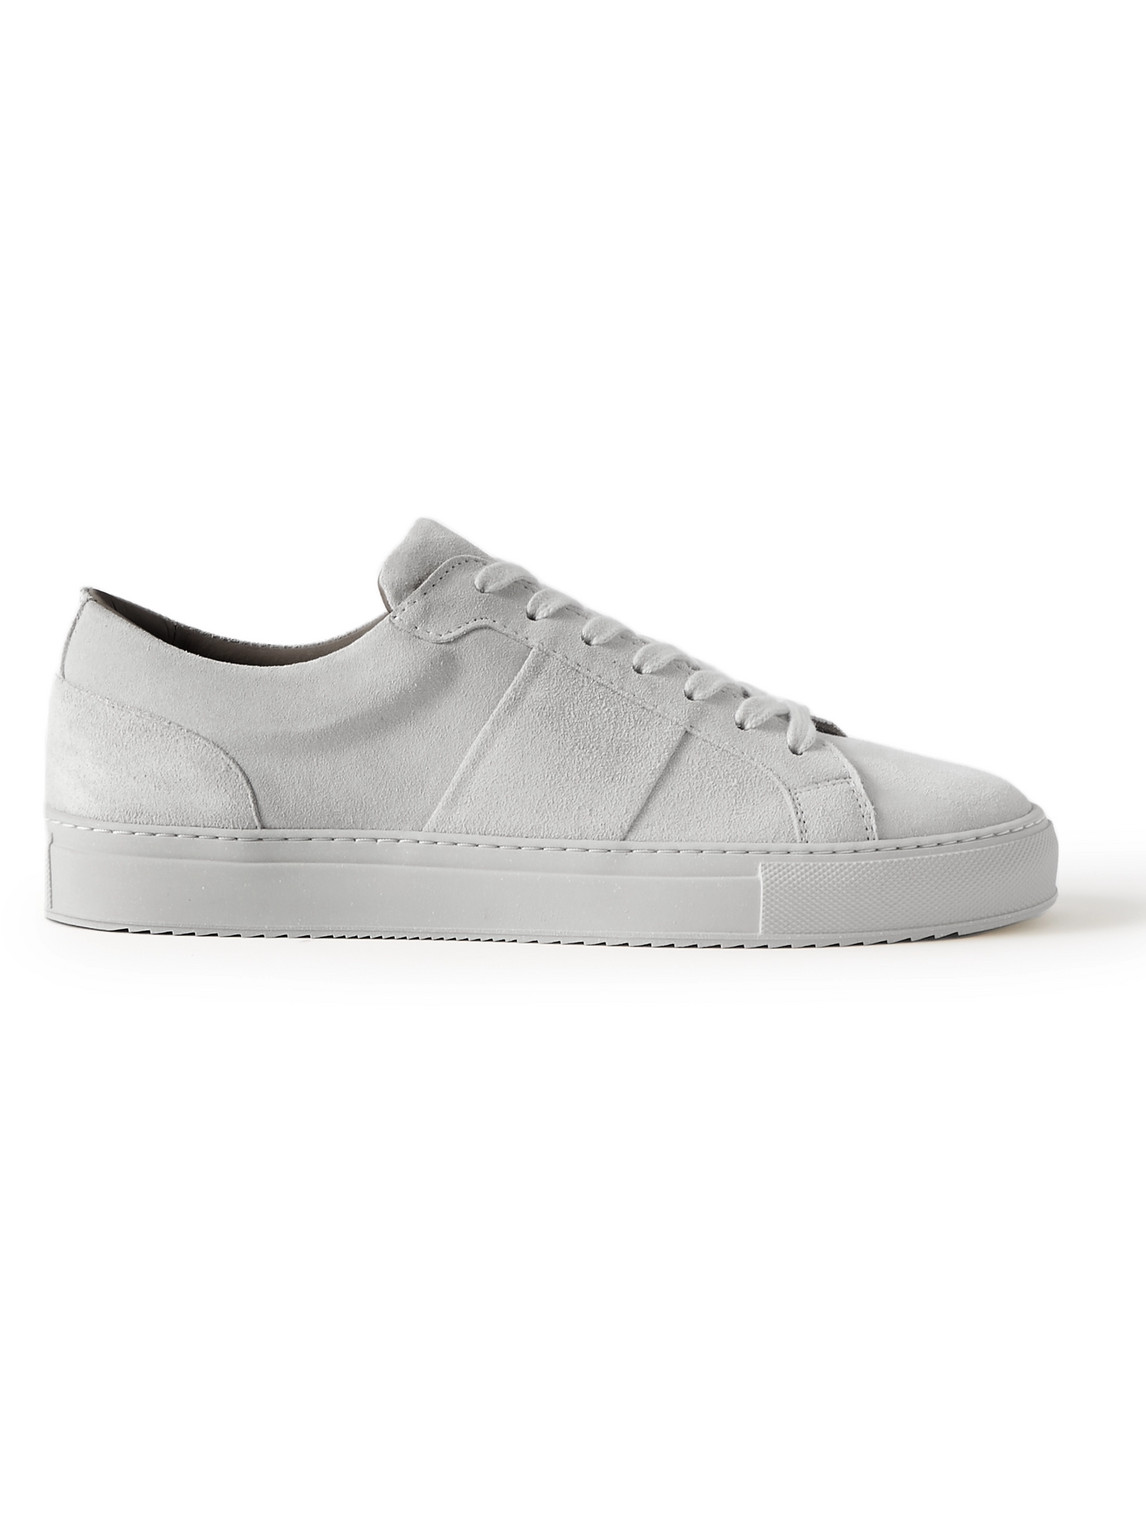 Mr P. Larry Suede Sneakers In Gray